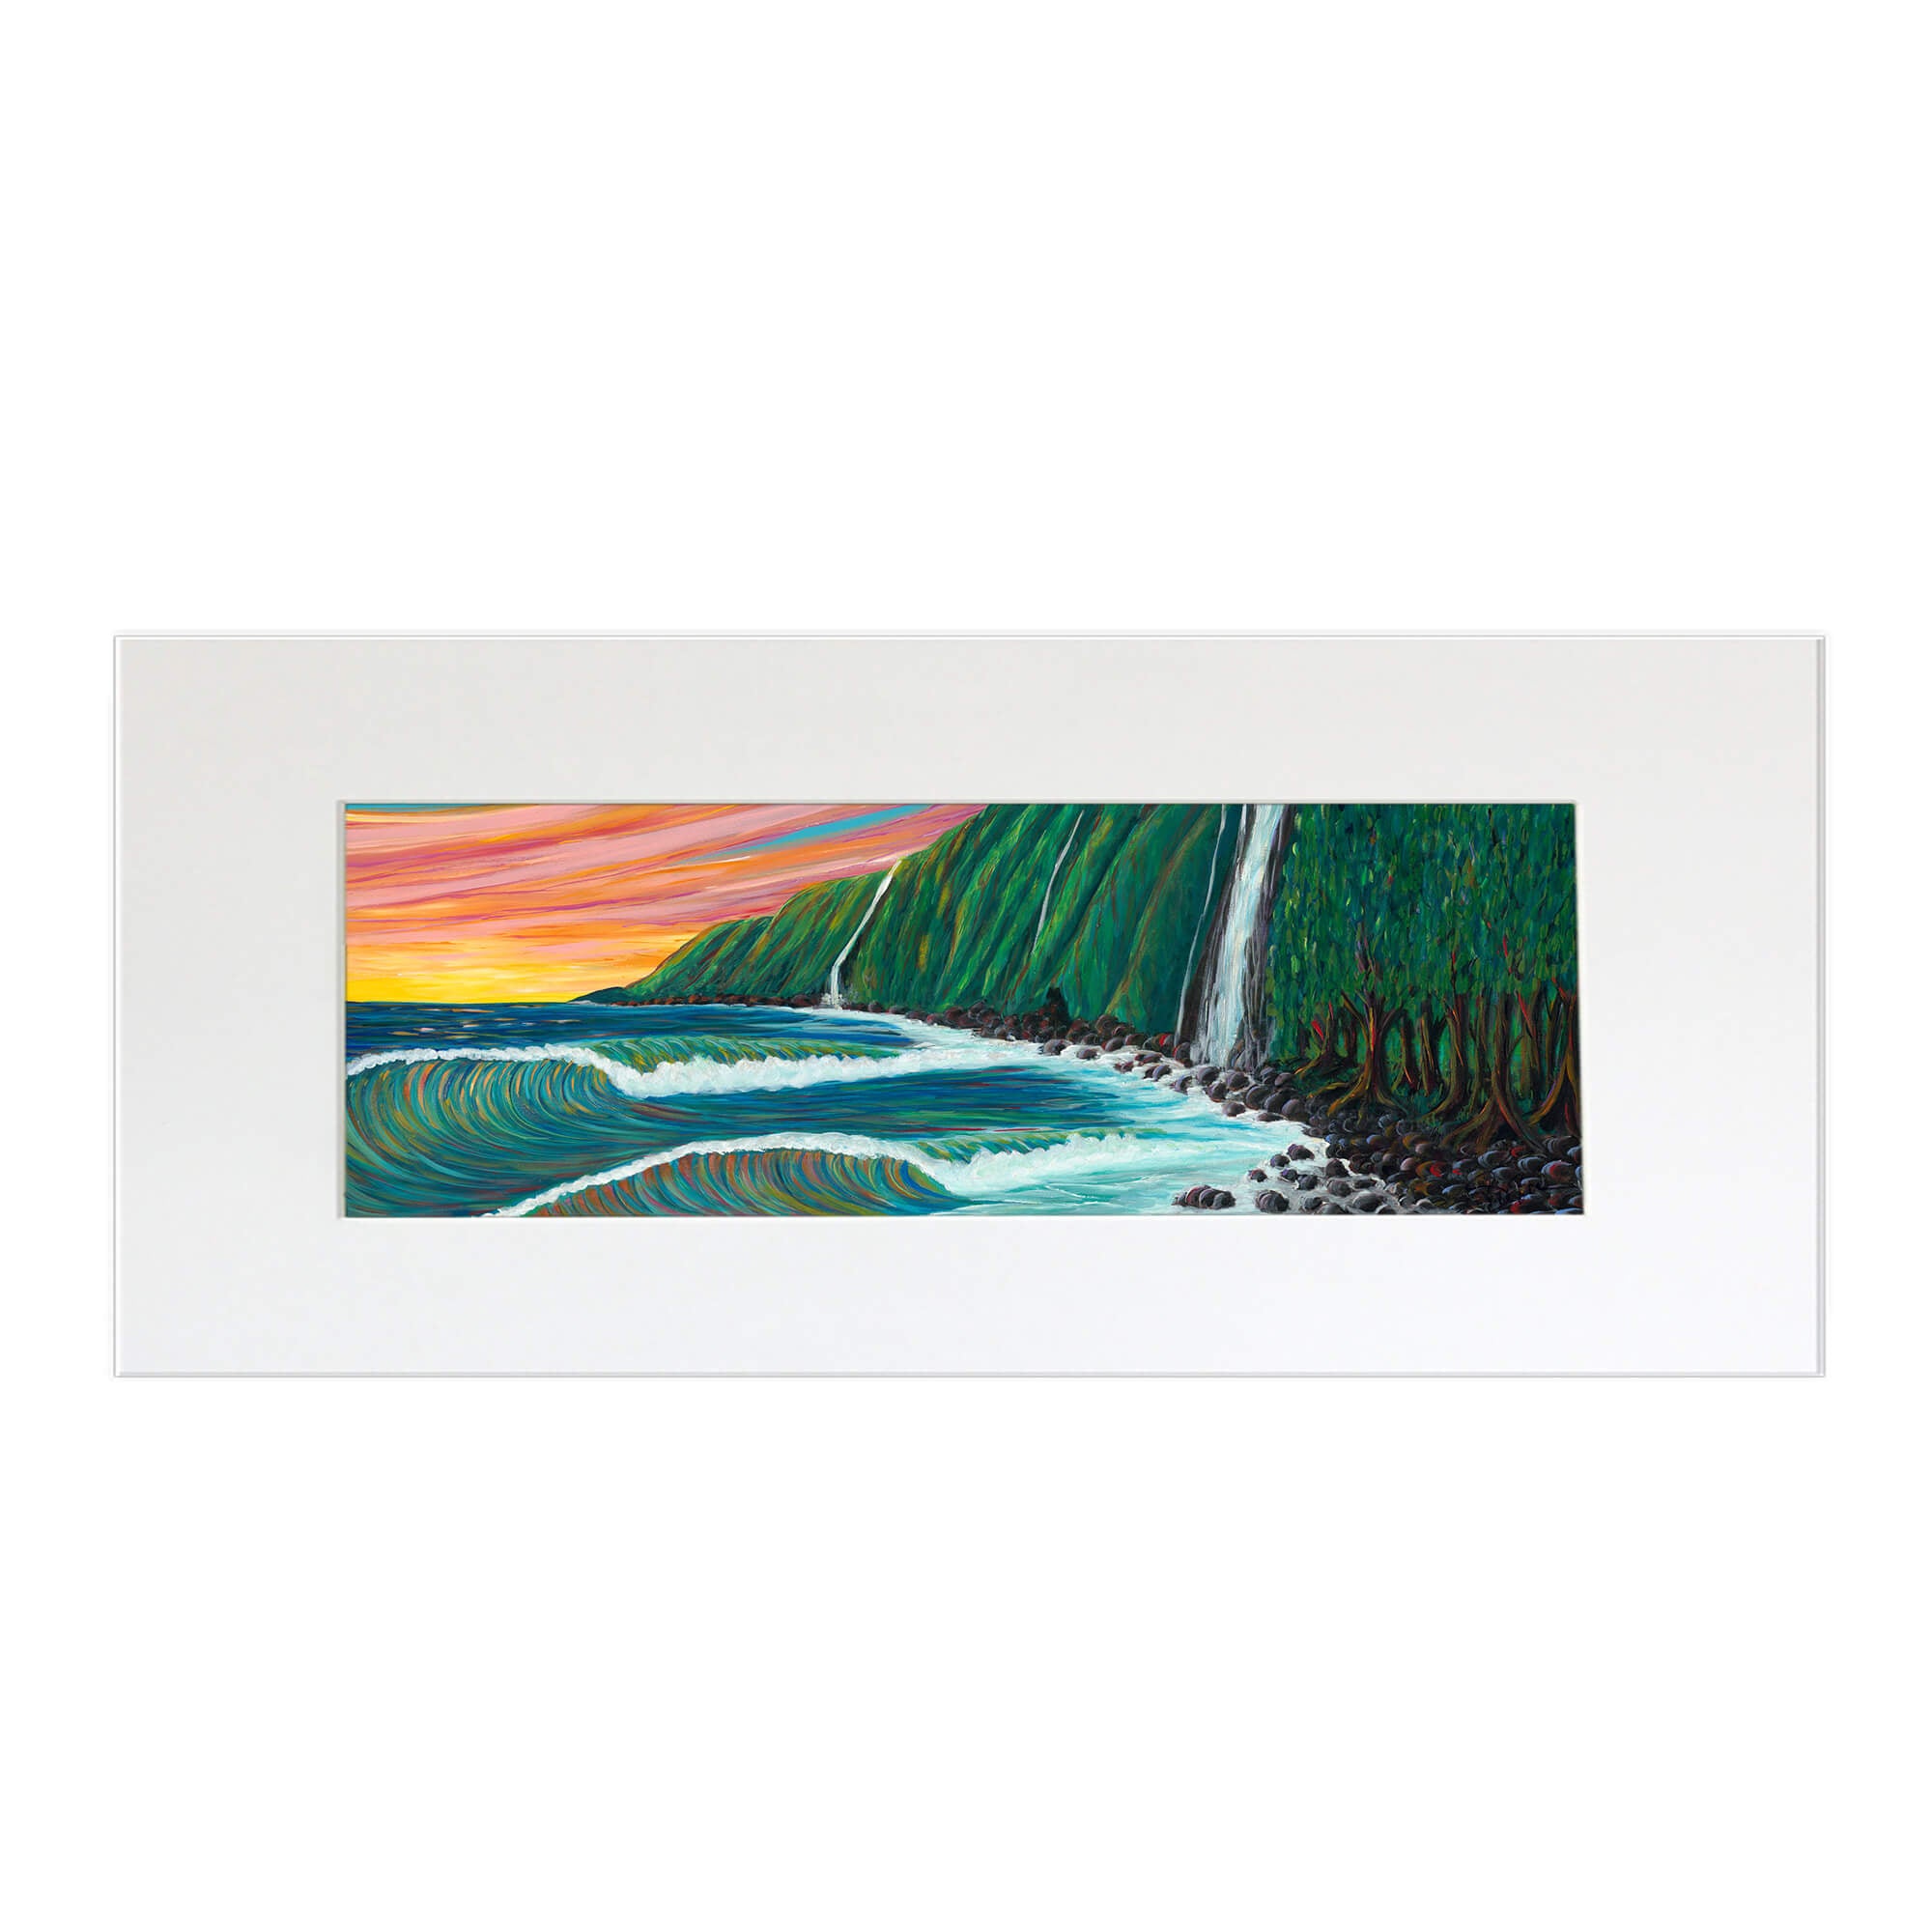 Matted art print showcasing the sunset  by the beach  by hawaii artist Suzanne MacAdam